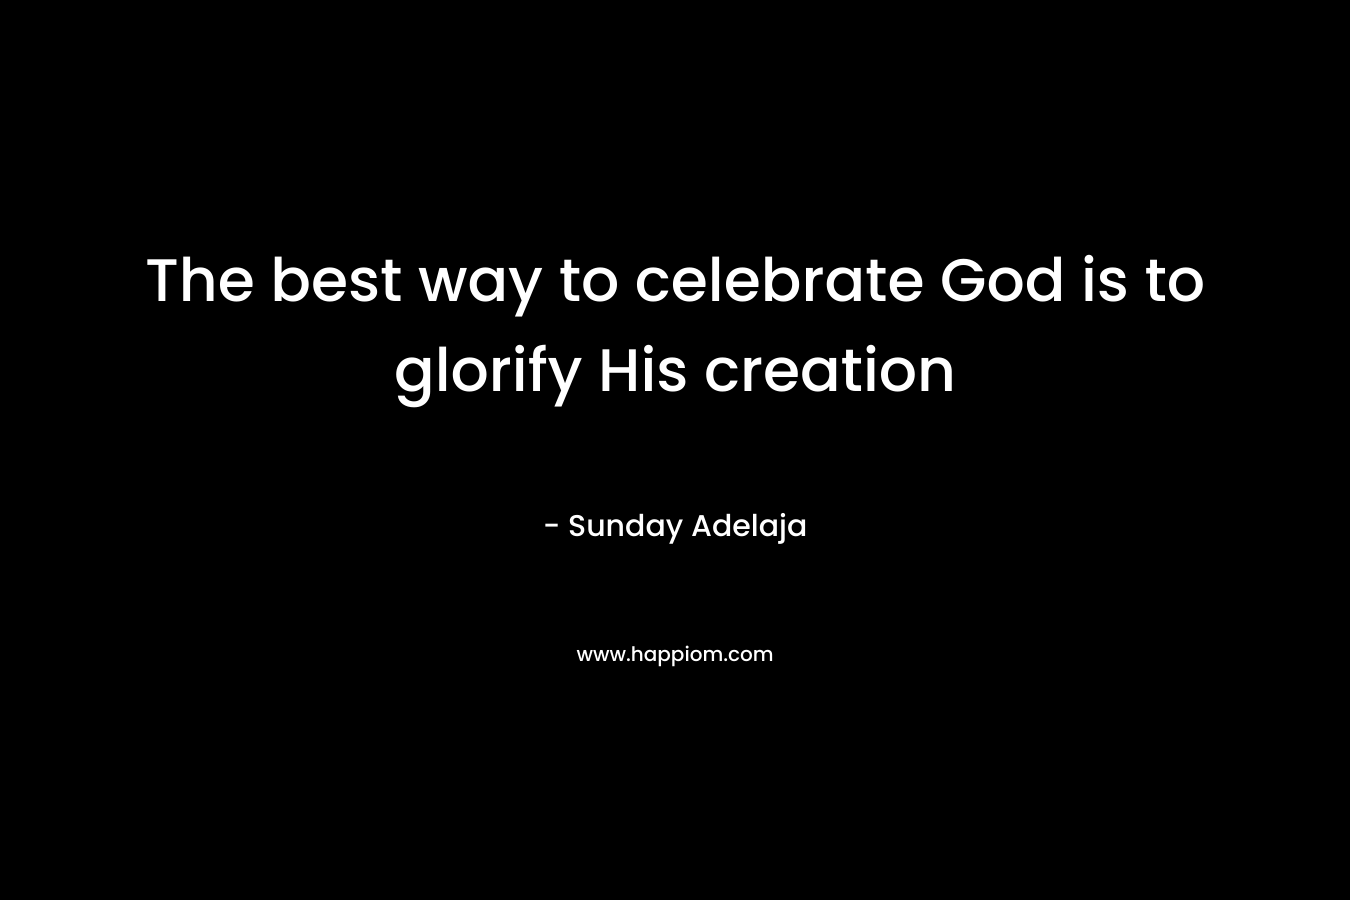 The best way to celebrate God is to glorify His creation